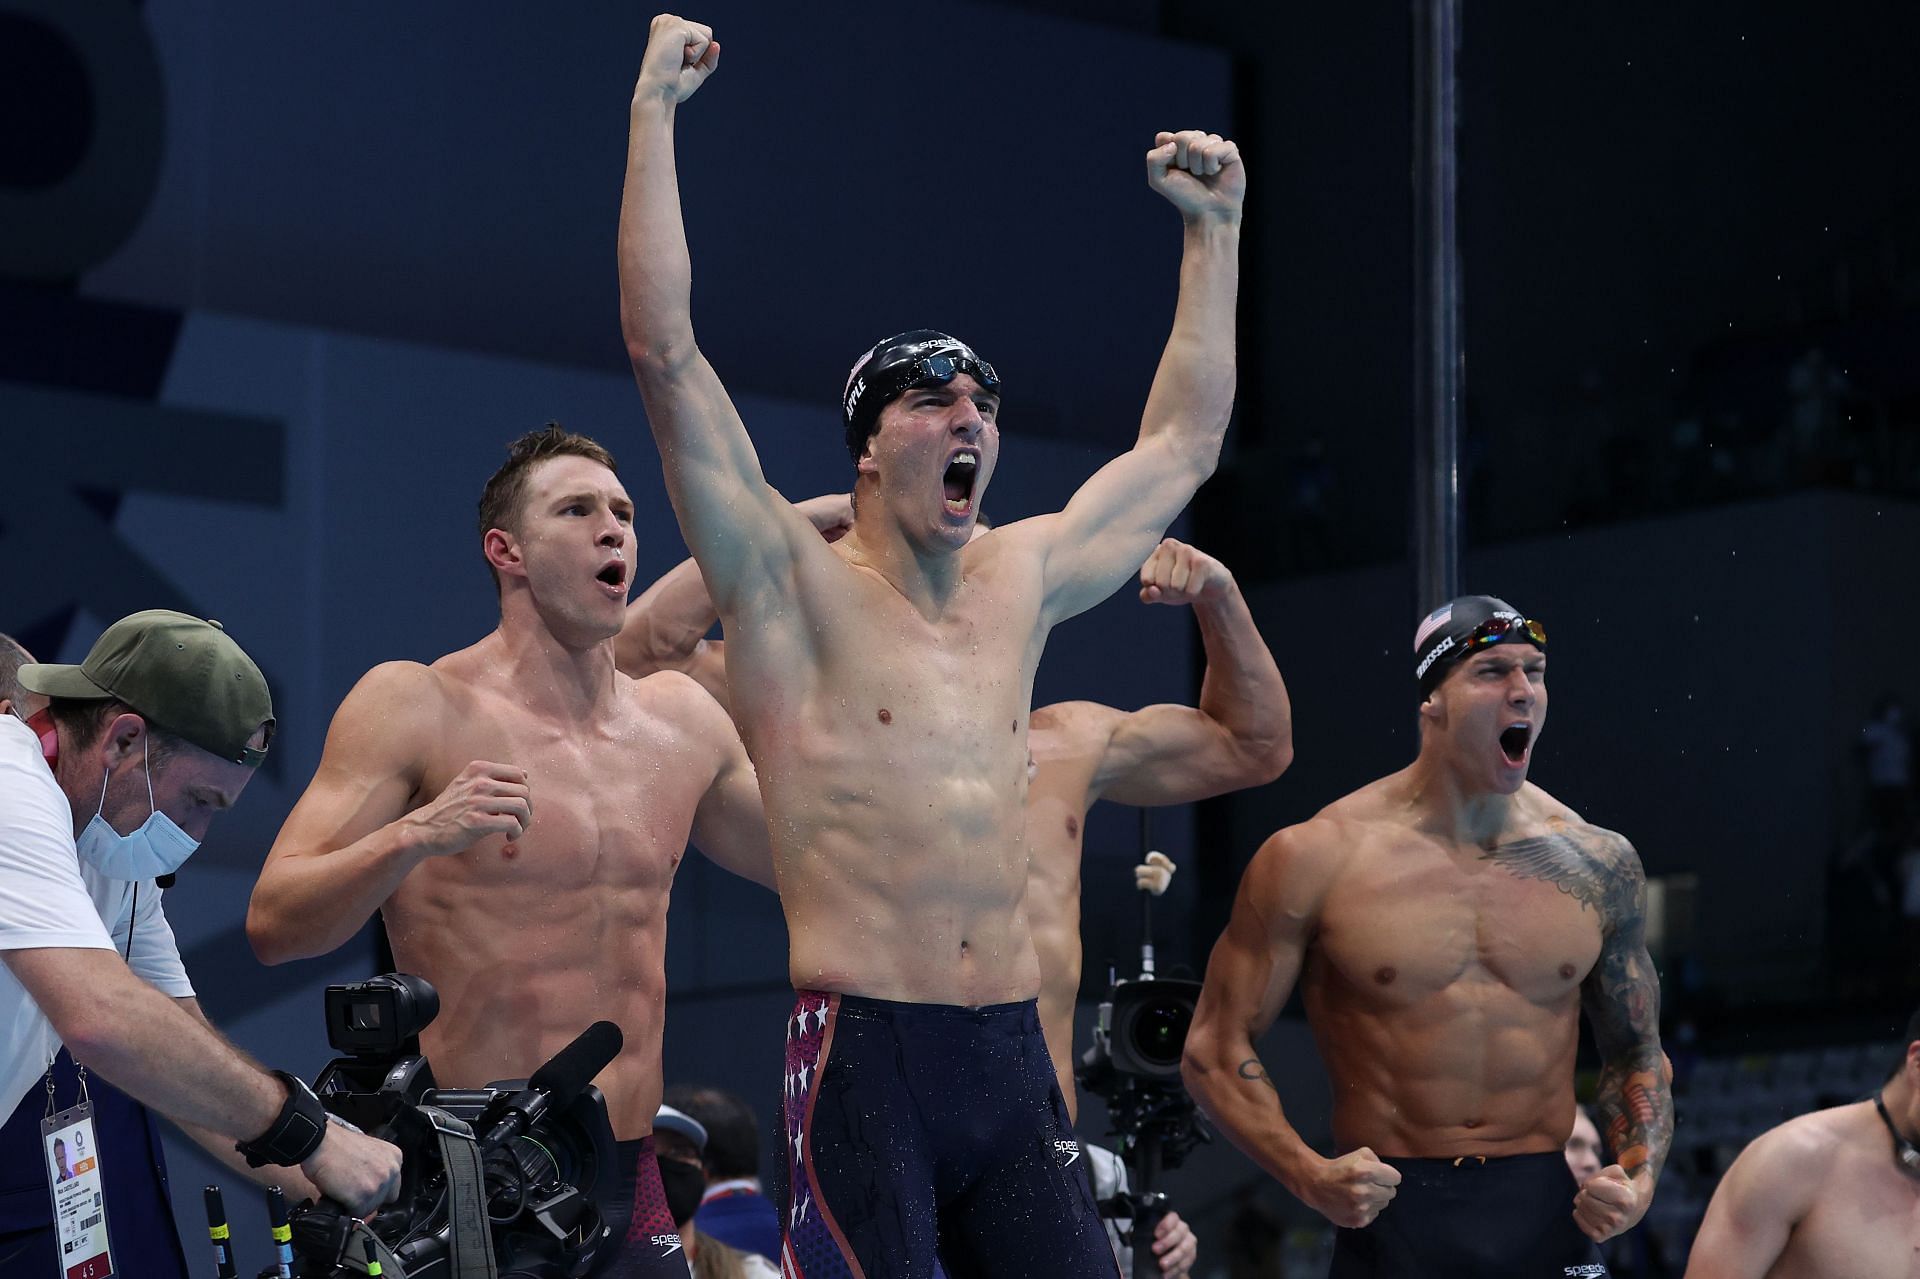 Zach Apple (C) and teammates of Team United States react after winning the gold medal and breaking the world record in the Men&#039;s 4 x 100m Medley Relay Final on day nine of the Tokyo 2020 Olympic Games at Tokyo Aquatics Centre on August 1, 2021, in Tokyo, Japan. (Photo by Al Bello/Getty Images)